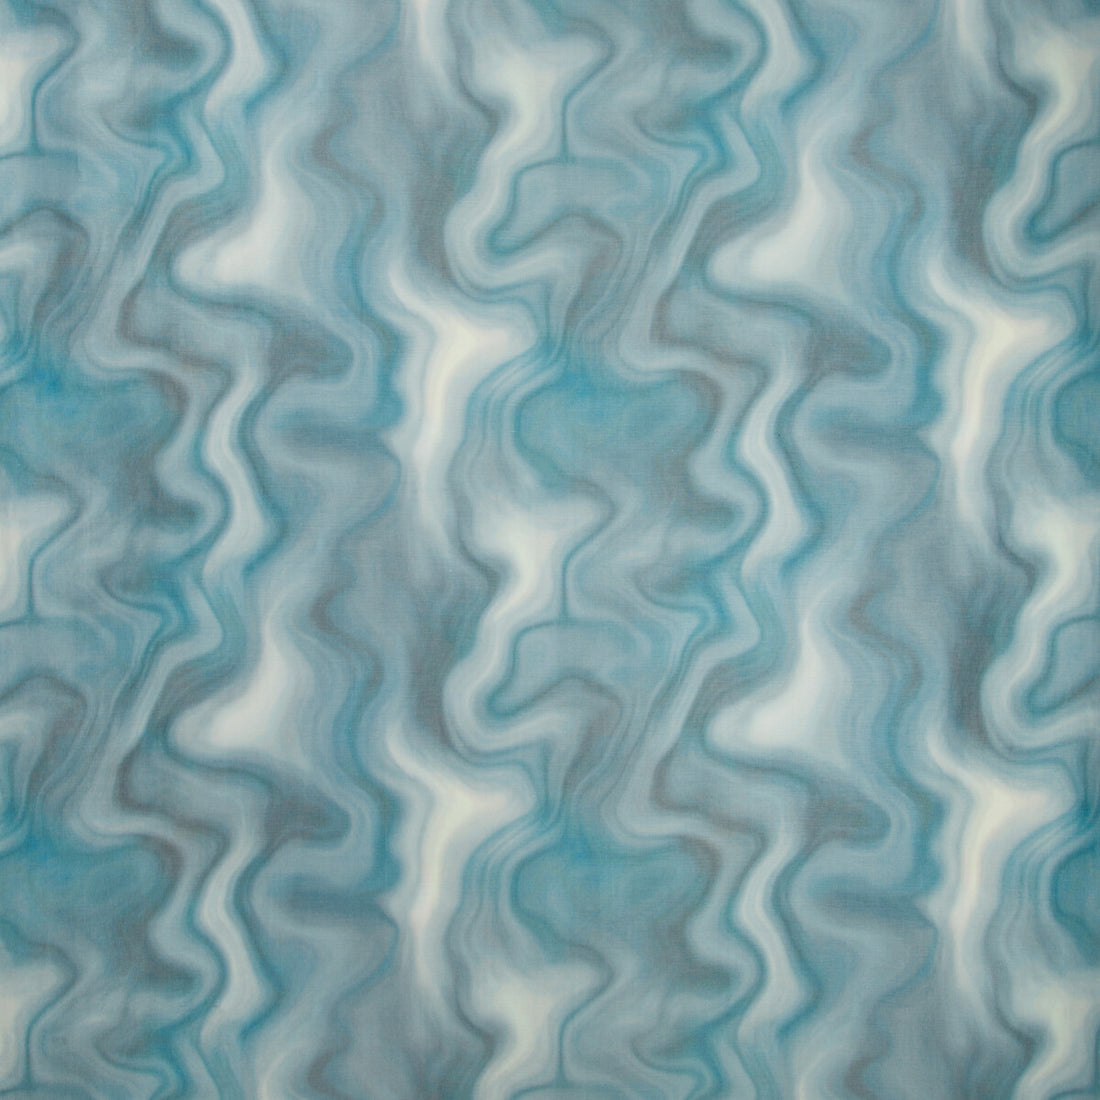 Azzurro-T fabric in ocean color - pattern AZZURRO-T.5.0 - by Kravet Couture in the Terrae Prints collection